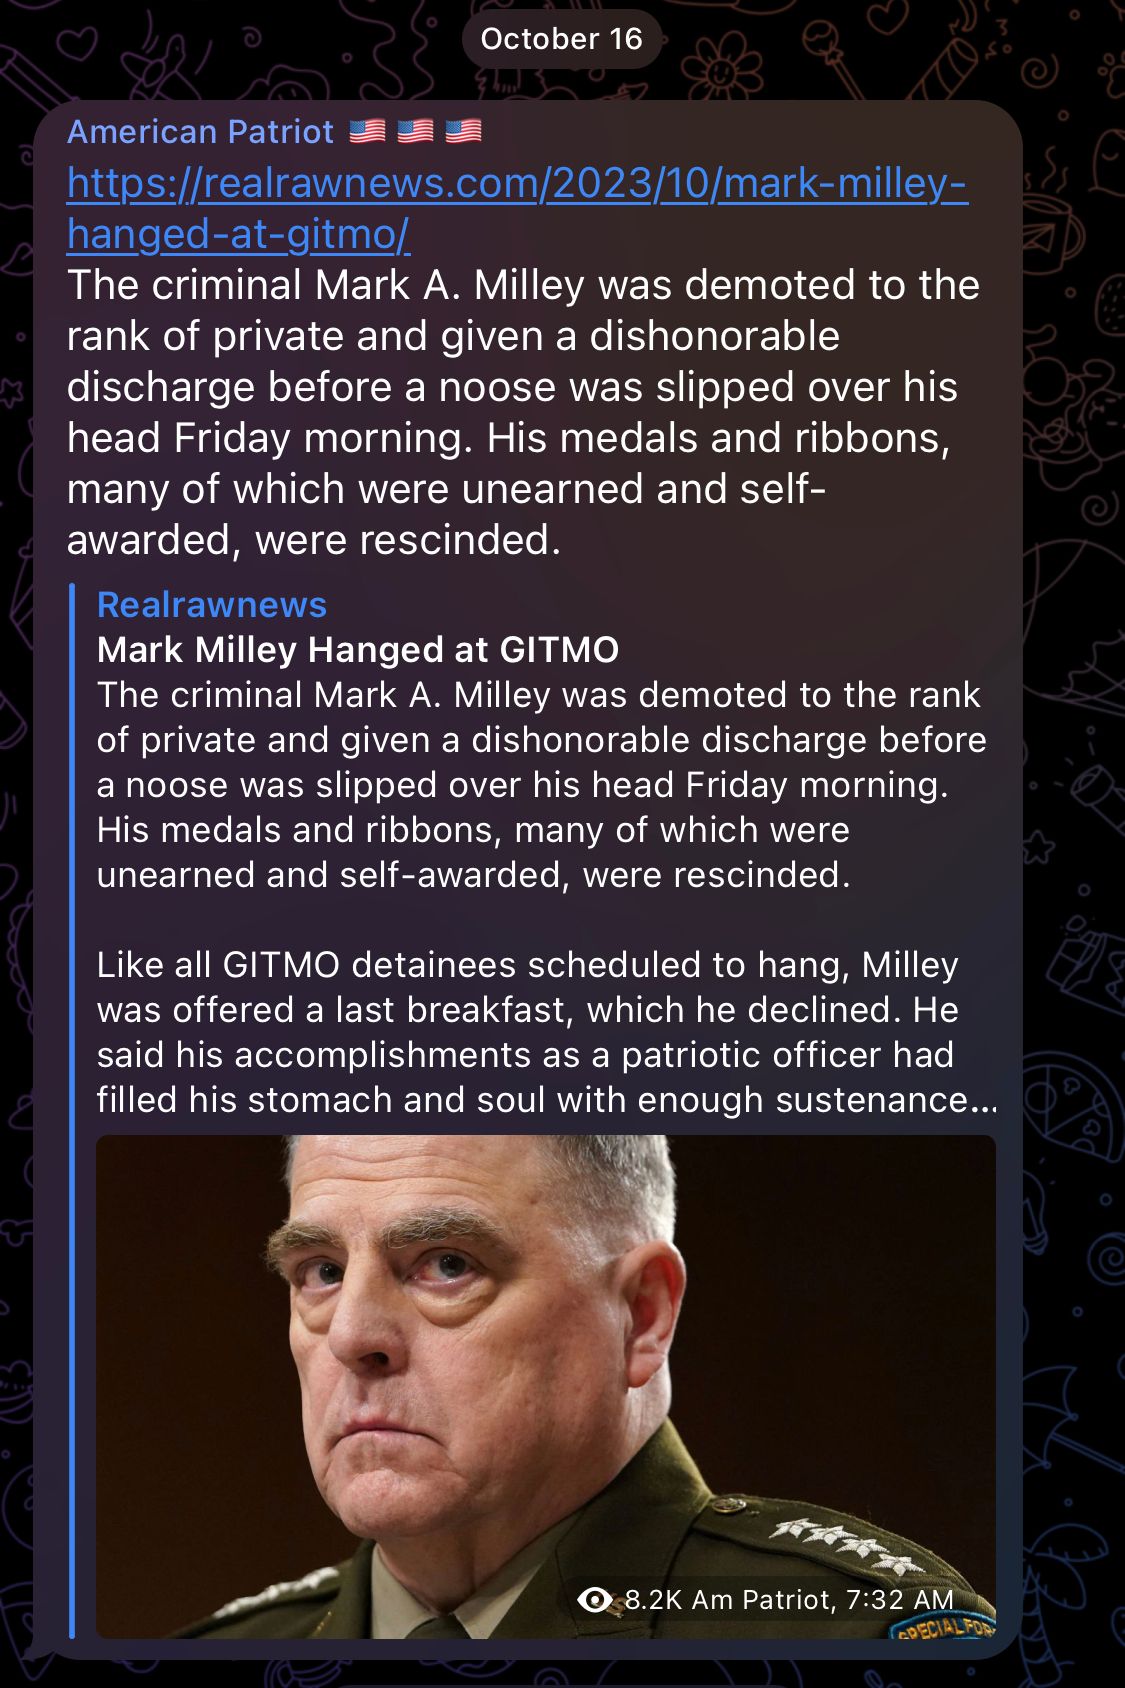 The criminal Mark A. Milley was demoted to the rank of private and given a dishonorable discharge before a noose was slipped over his head Friday morning.